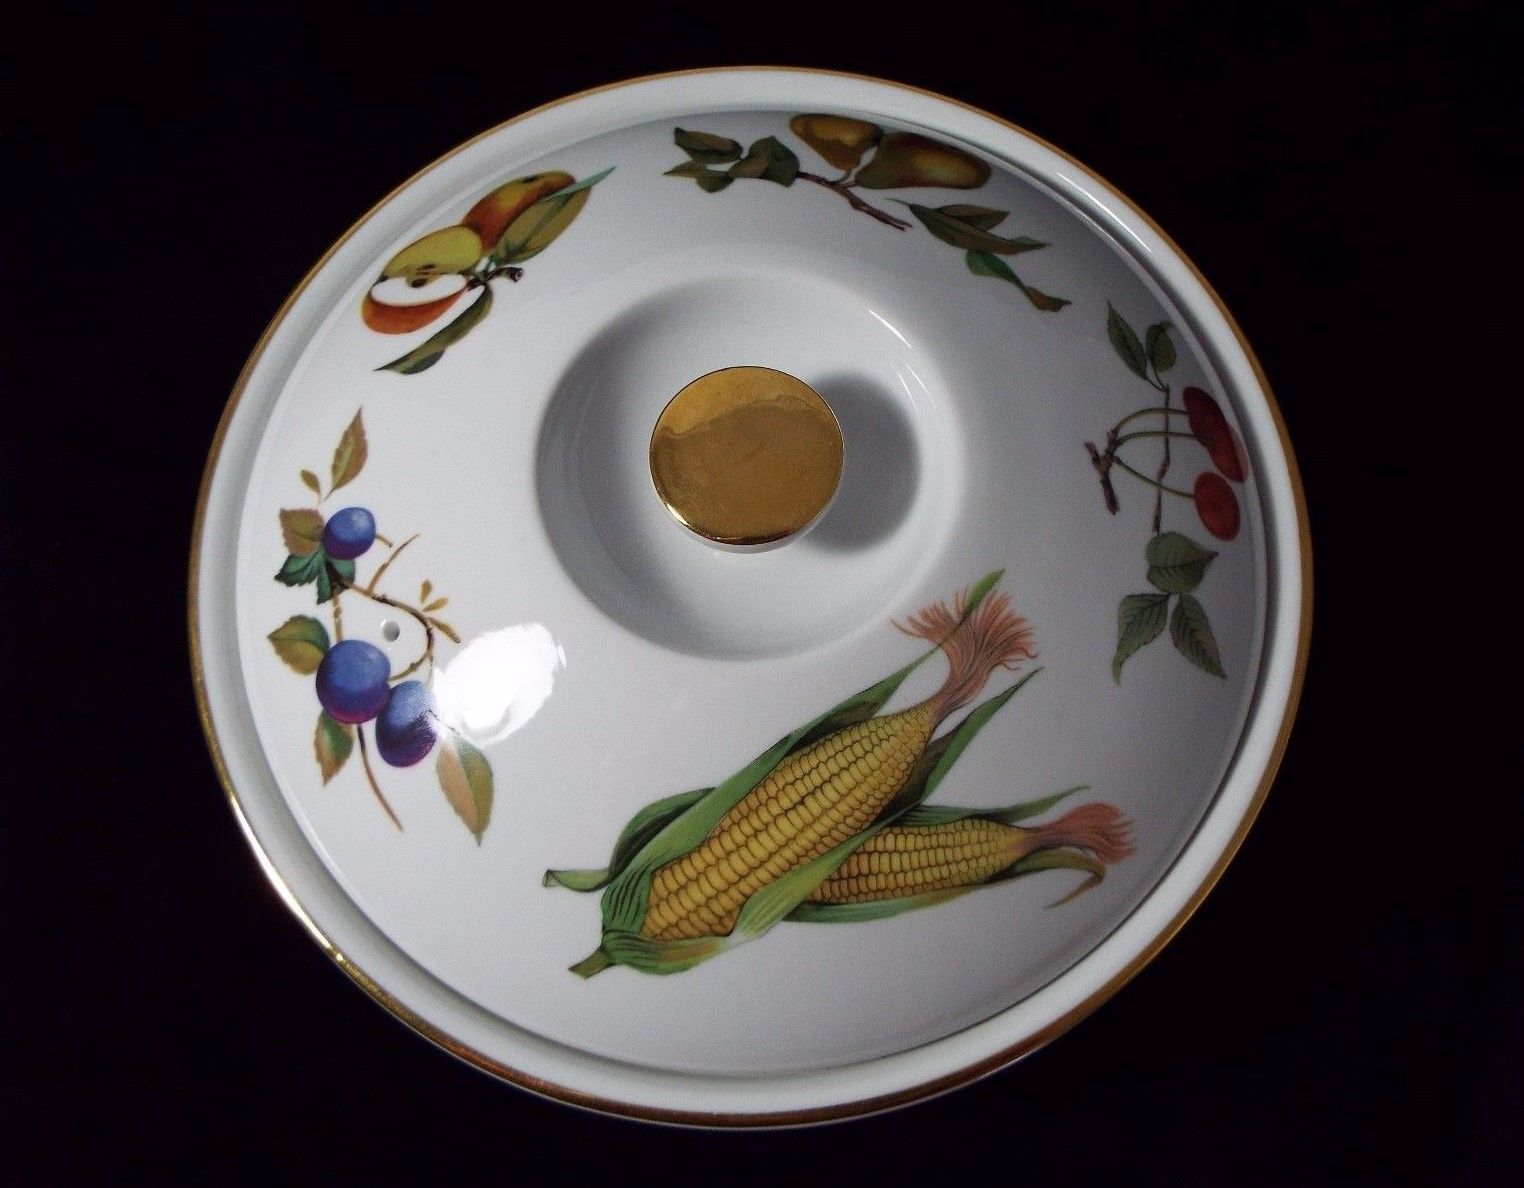 Primary image for Royal Worcester Evesham Gold 10" Round Casserole Entree Dish with Flat Handles 